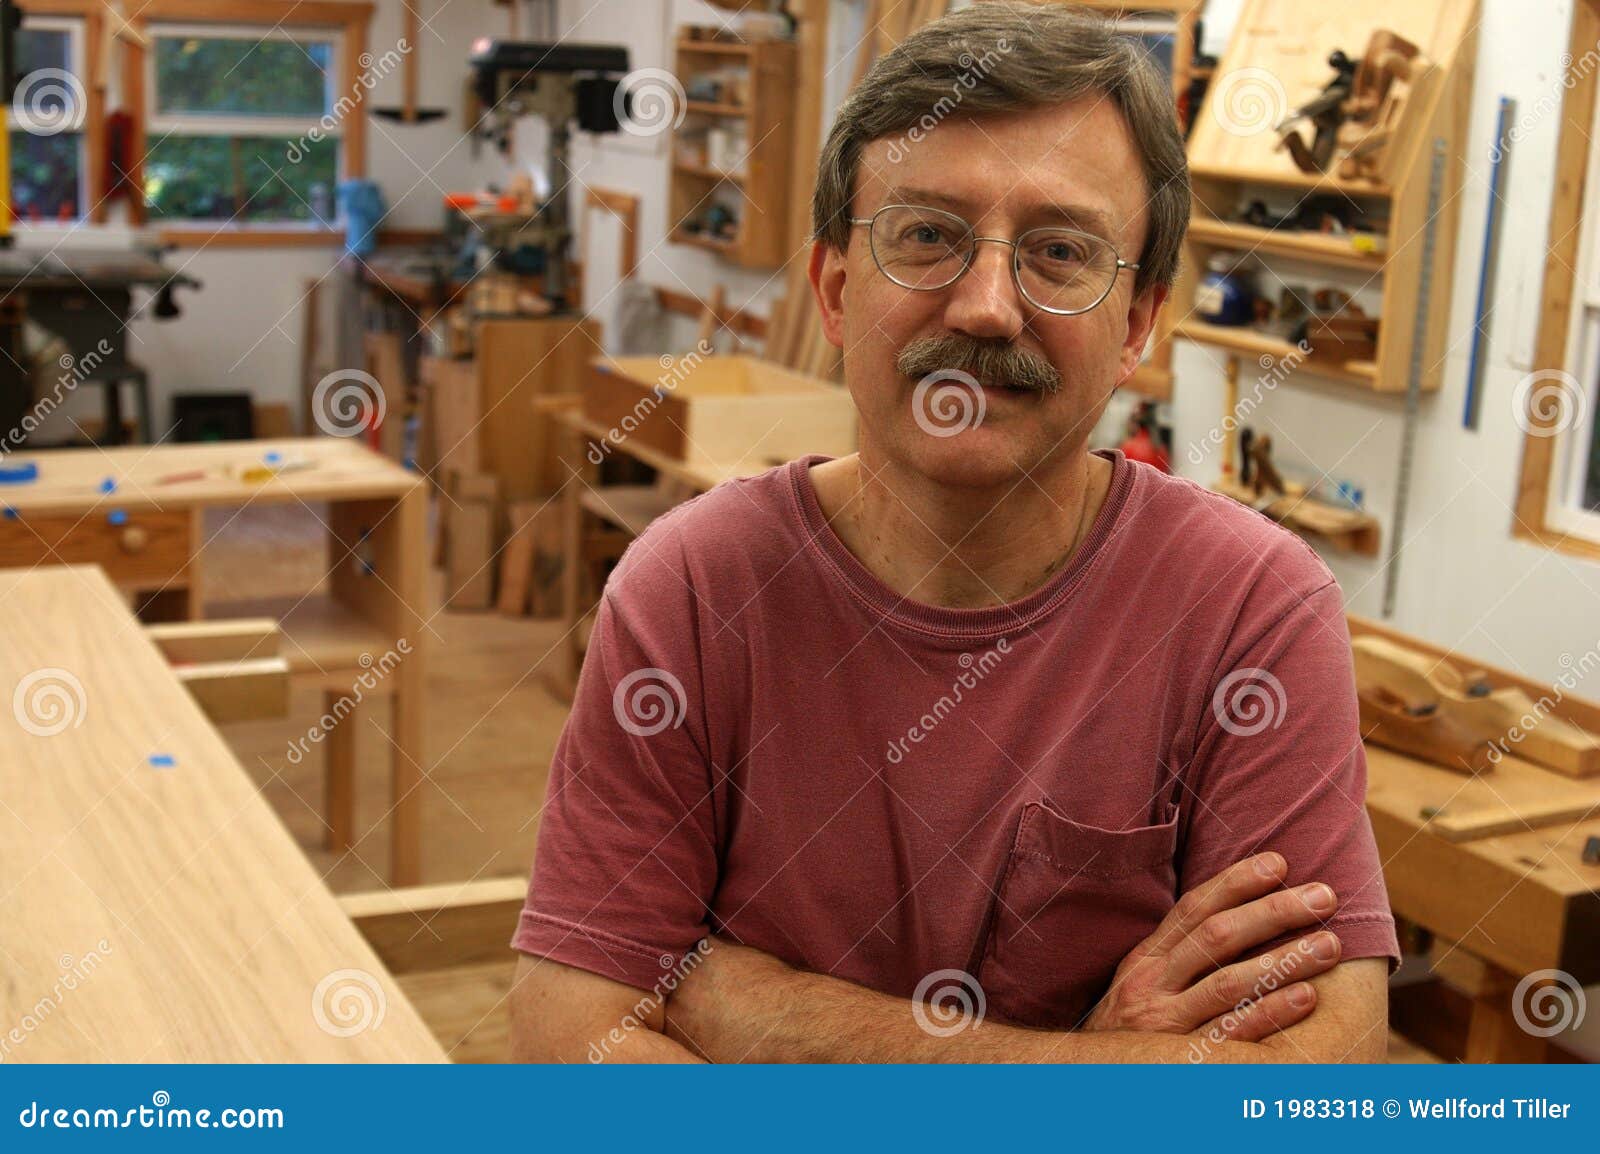 woodworker in his shop